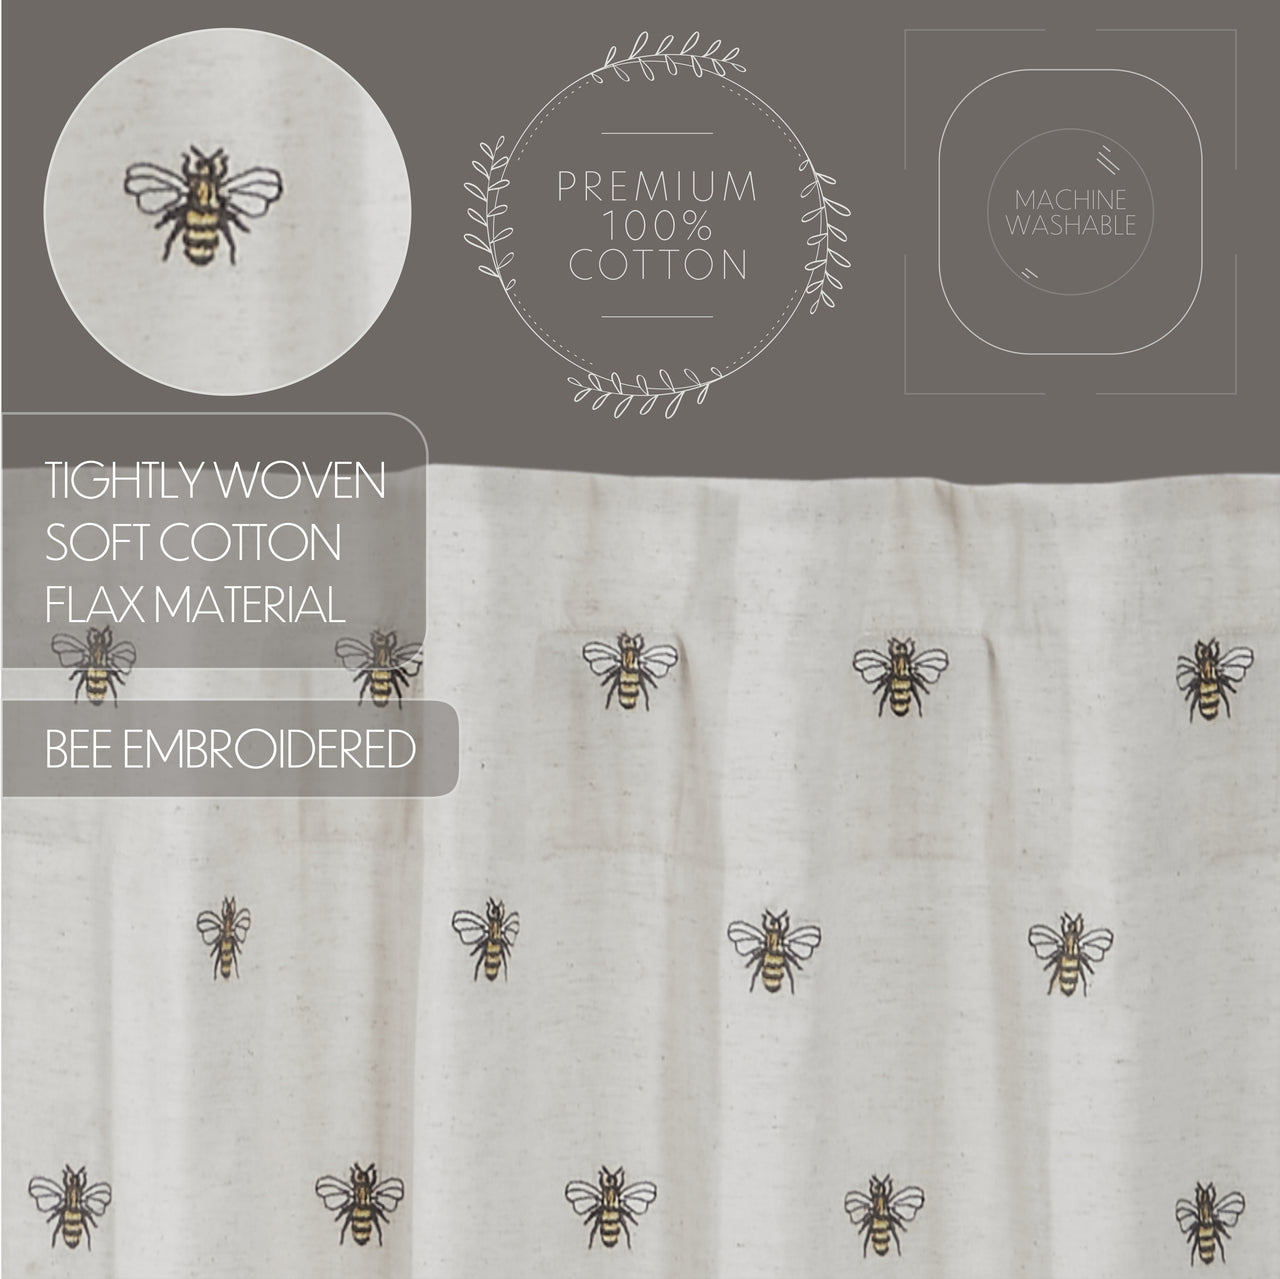 Embroidered Bee Valance Curtain 16x60 VHC Brands